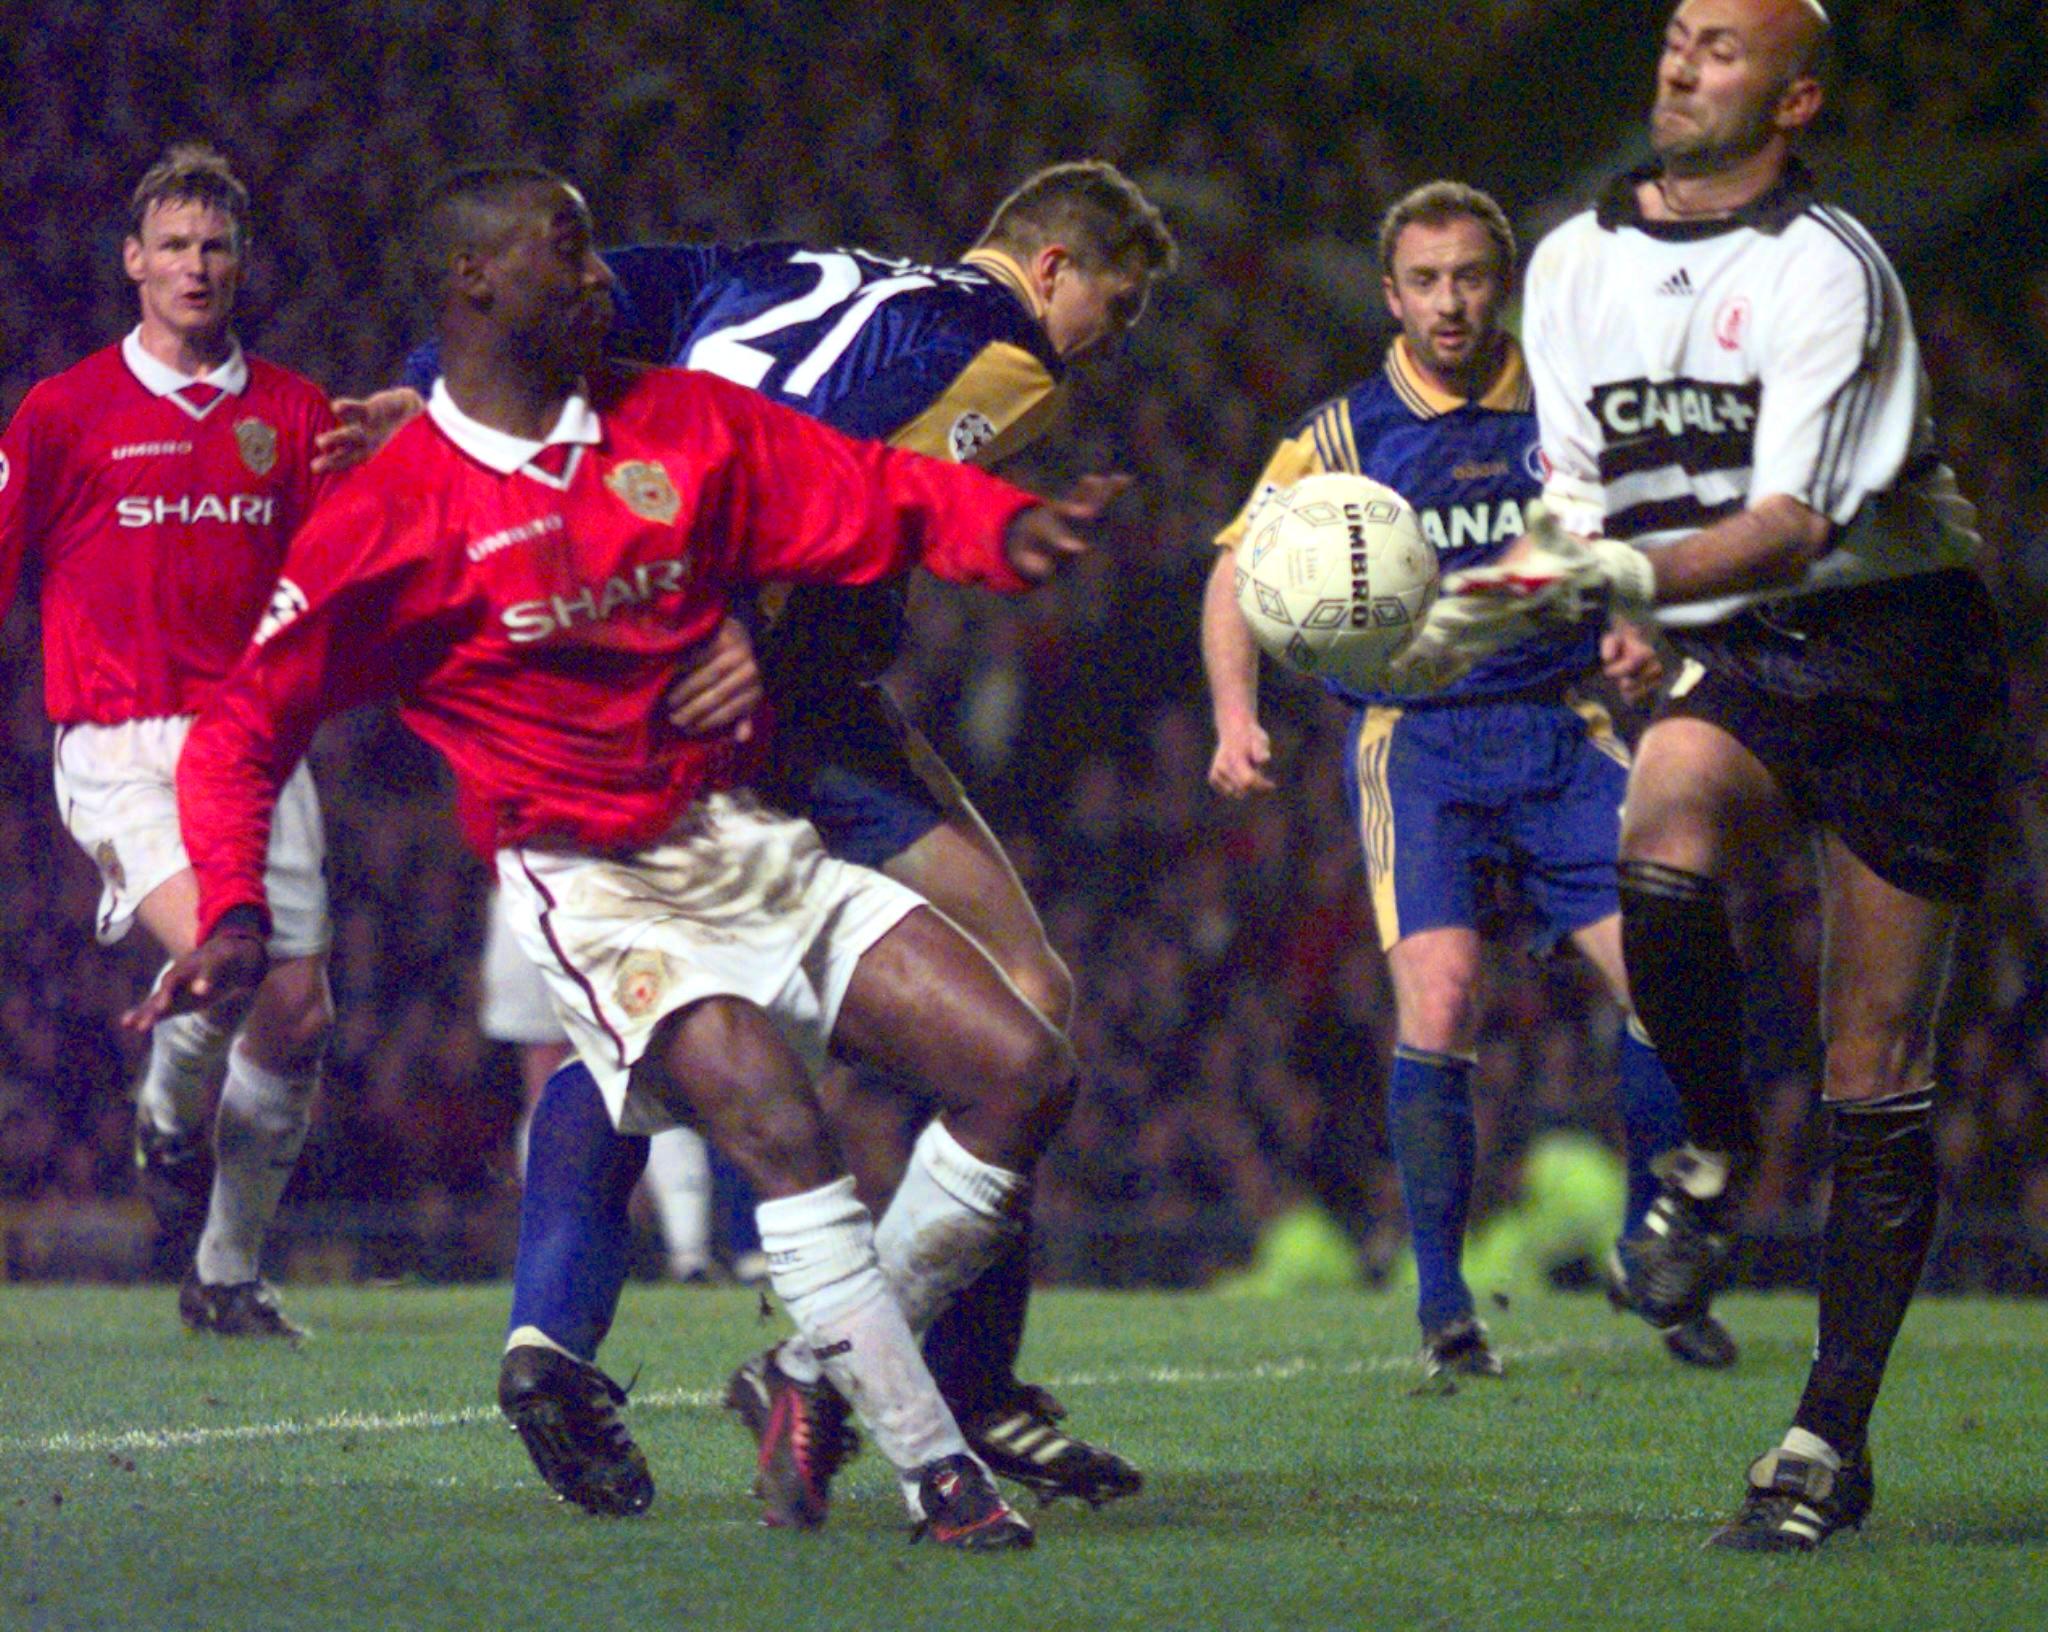 Fabien Barthez makes a save for Monaco against Manchester United in the Champions League in March 1998.